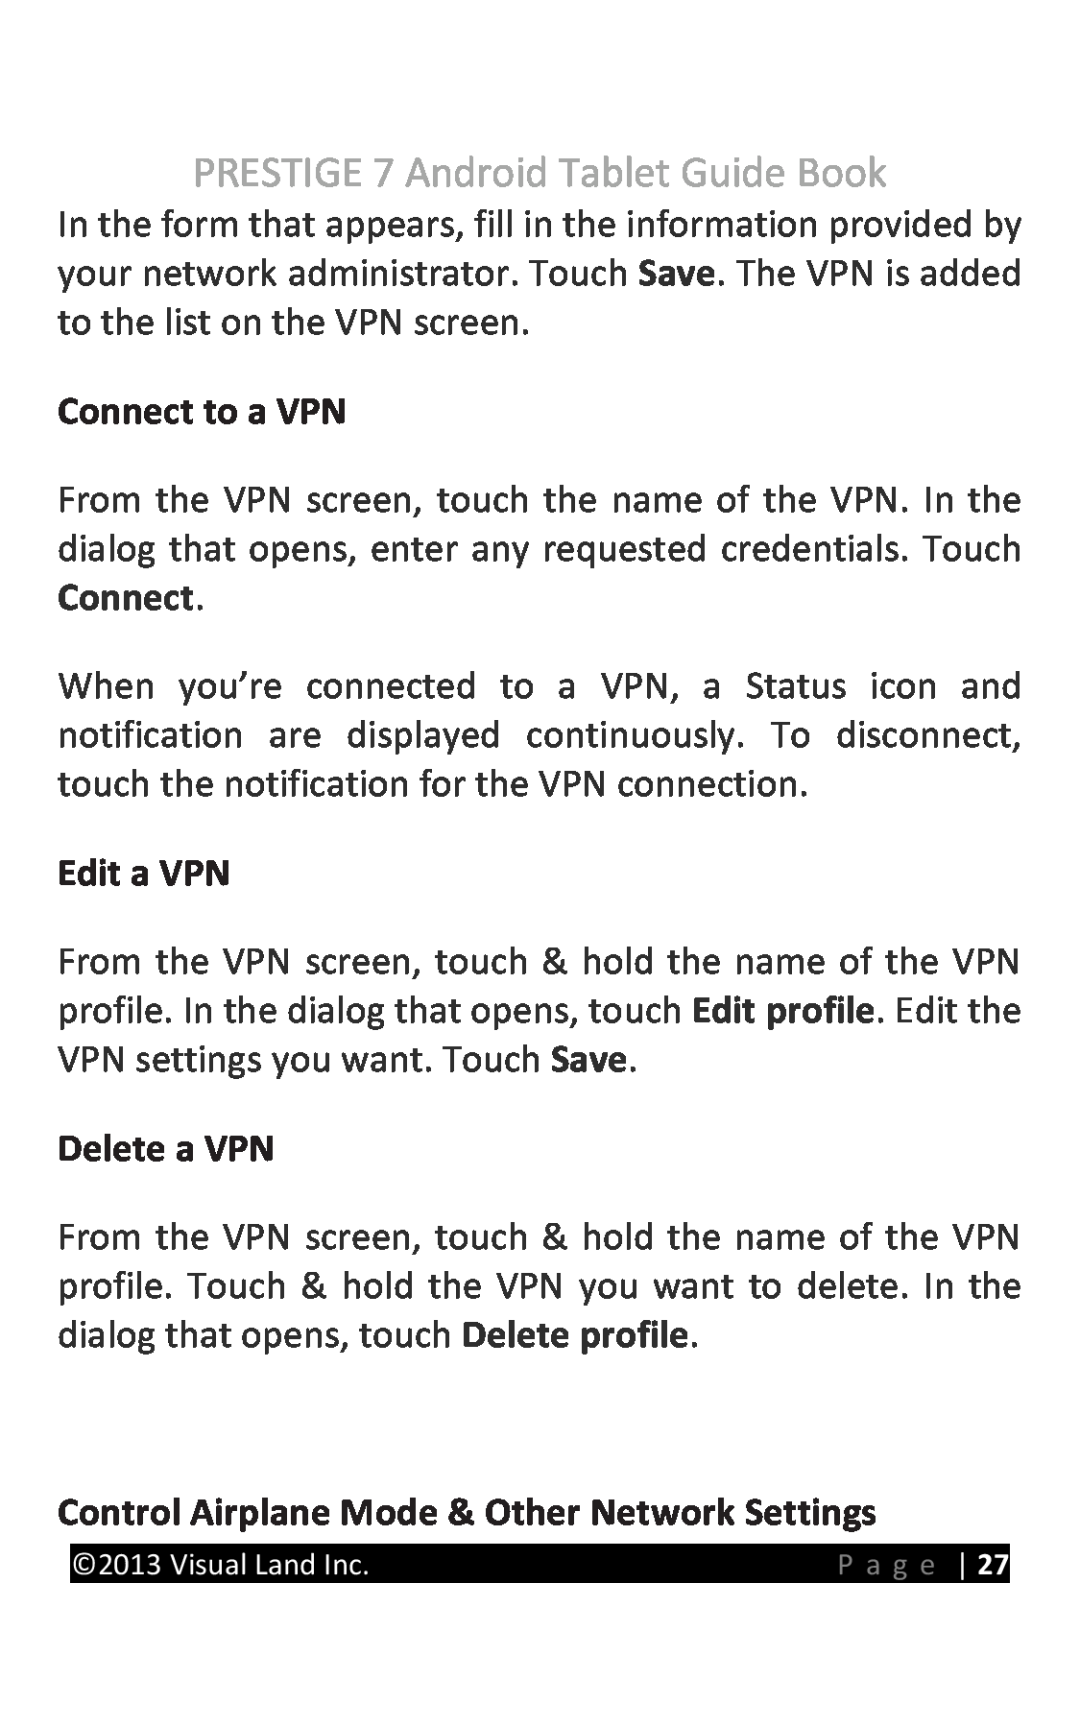 Visual Land 7D8TCBLK manual Connect to a VPN, Edit a VPN, Delete a VPN, Control Airplane Mode & Other Network Settings 